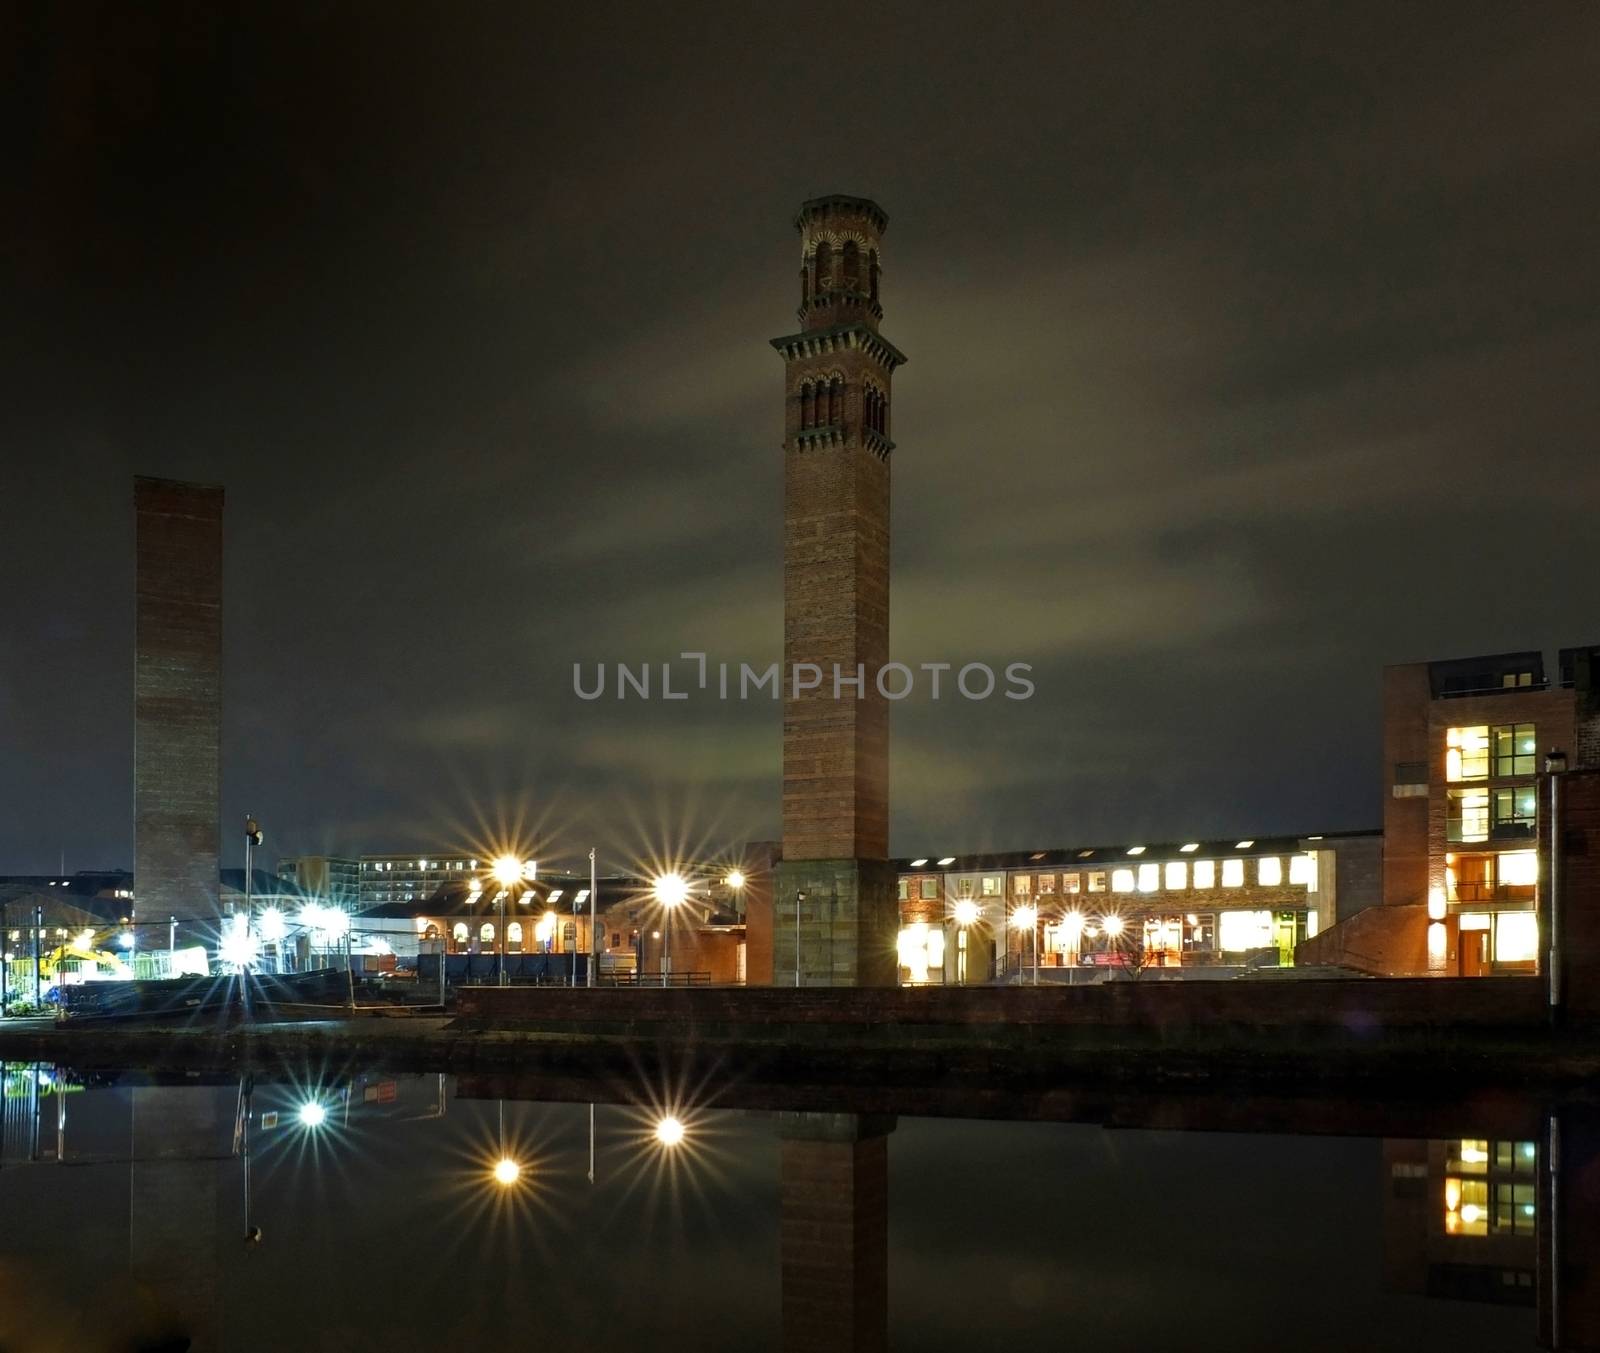 cityscape view of holbeck in south leeds showing the historic tower works at night with office building and lights reflected in the canal by philopenshaw